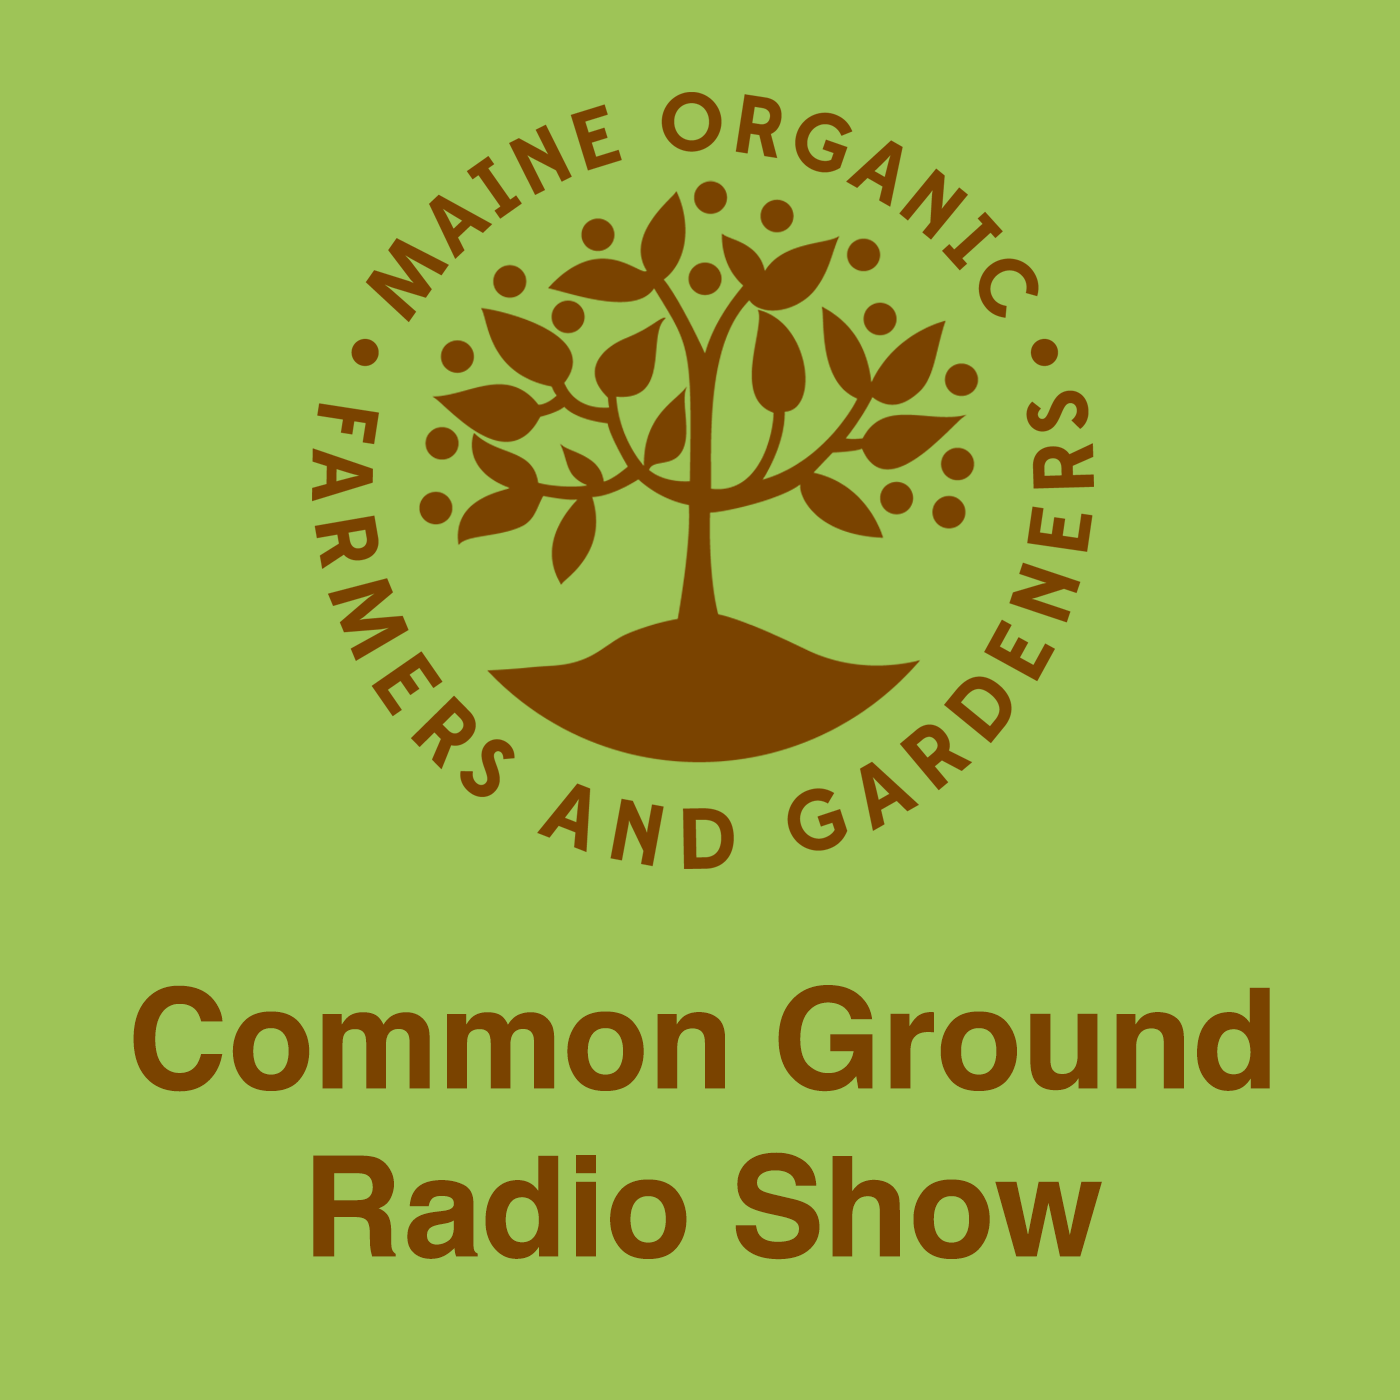 Common Ground Radio | WERU 89.9 FM Blue Hill, Maine Local News and Public Affairs Archives